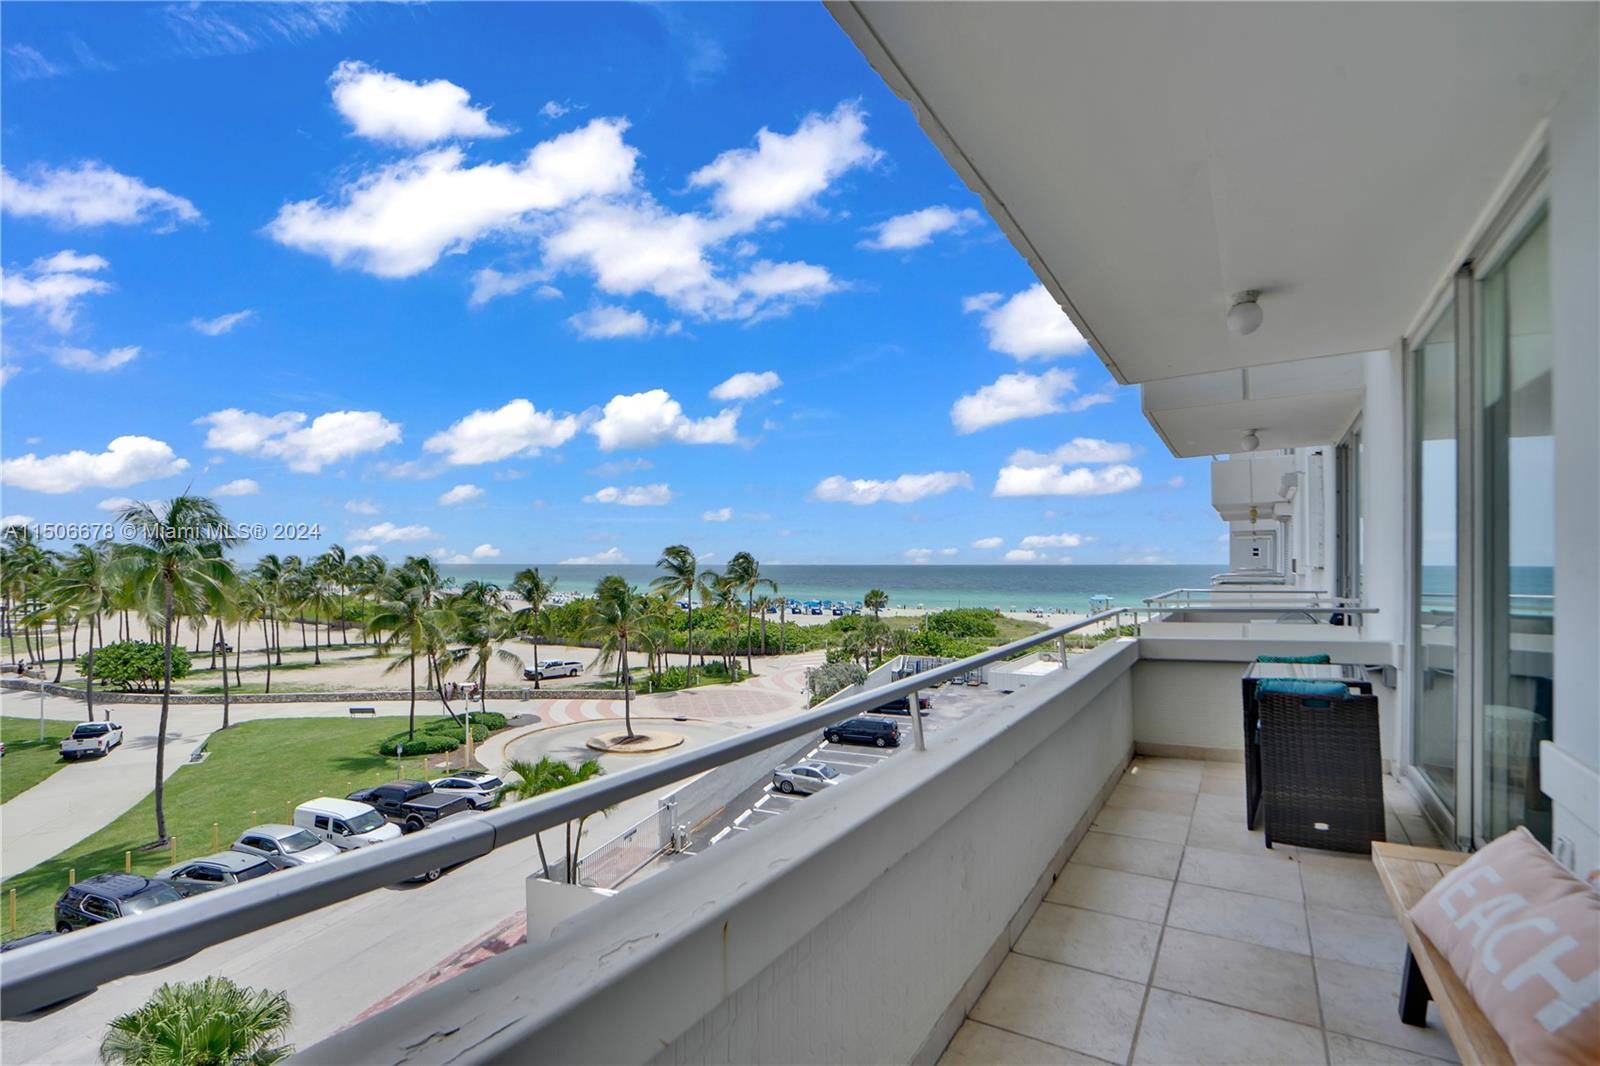 Tastefully decorated 1bed, 1bath with the ability to walk downstairs to the beach !